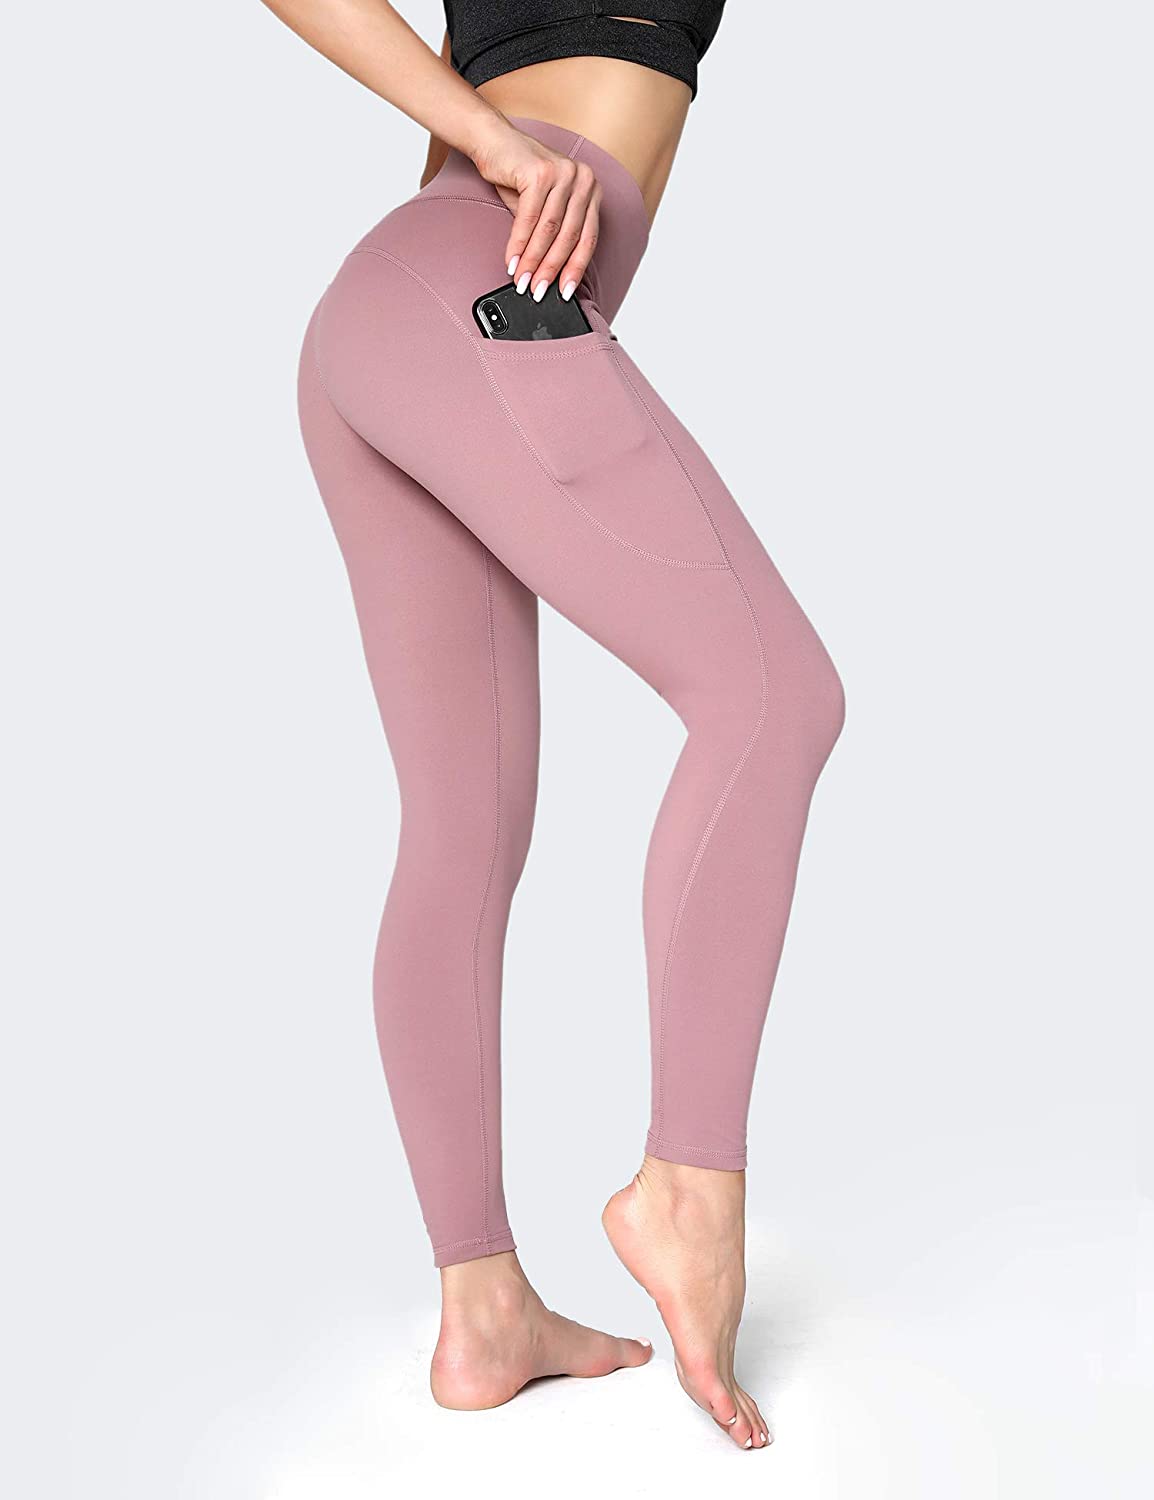 Ultra Tight Yoga Pants For Sale